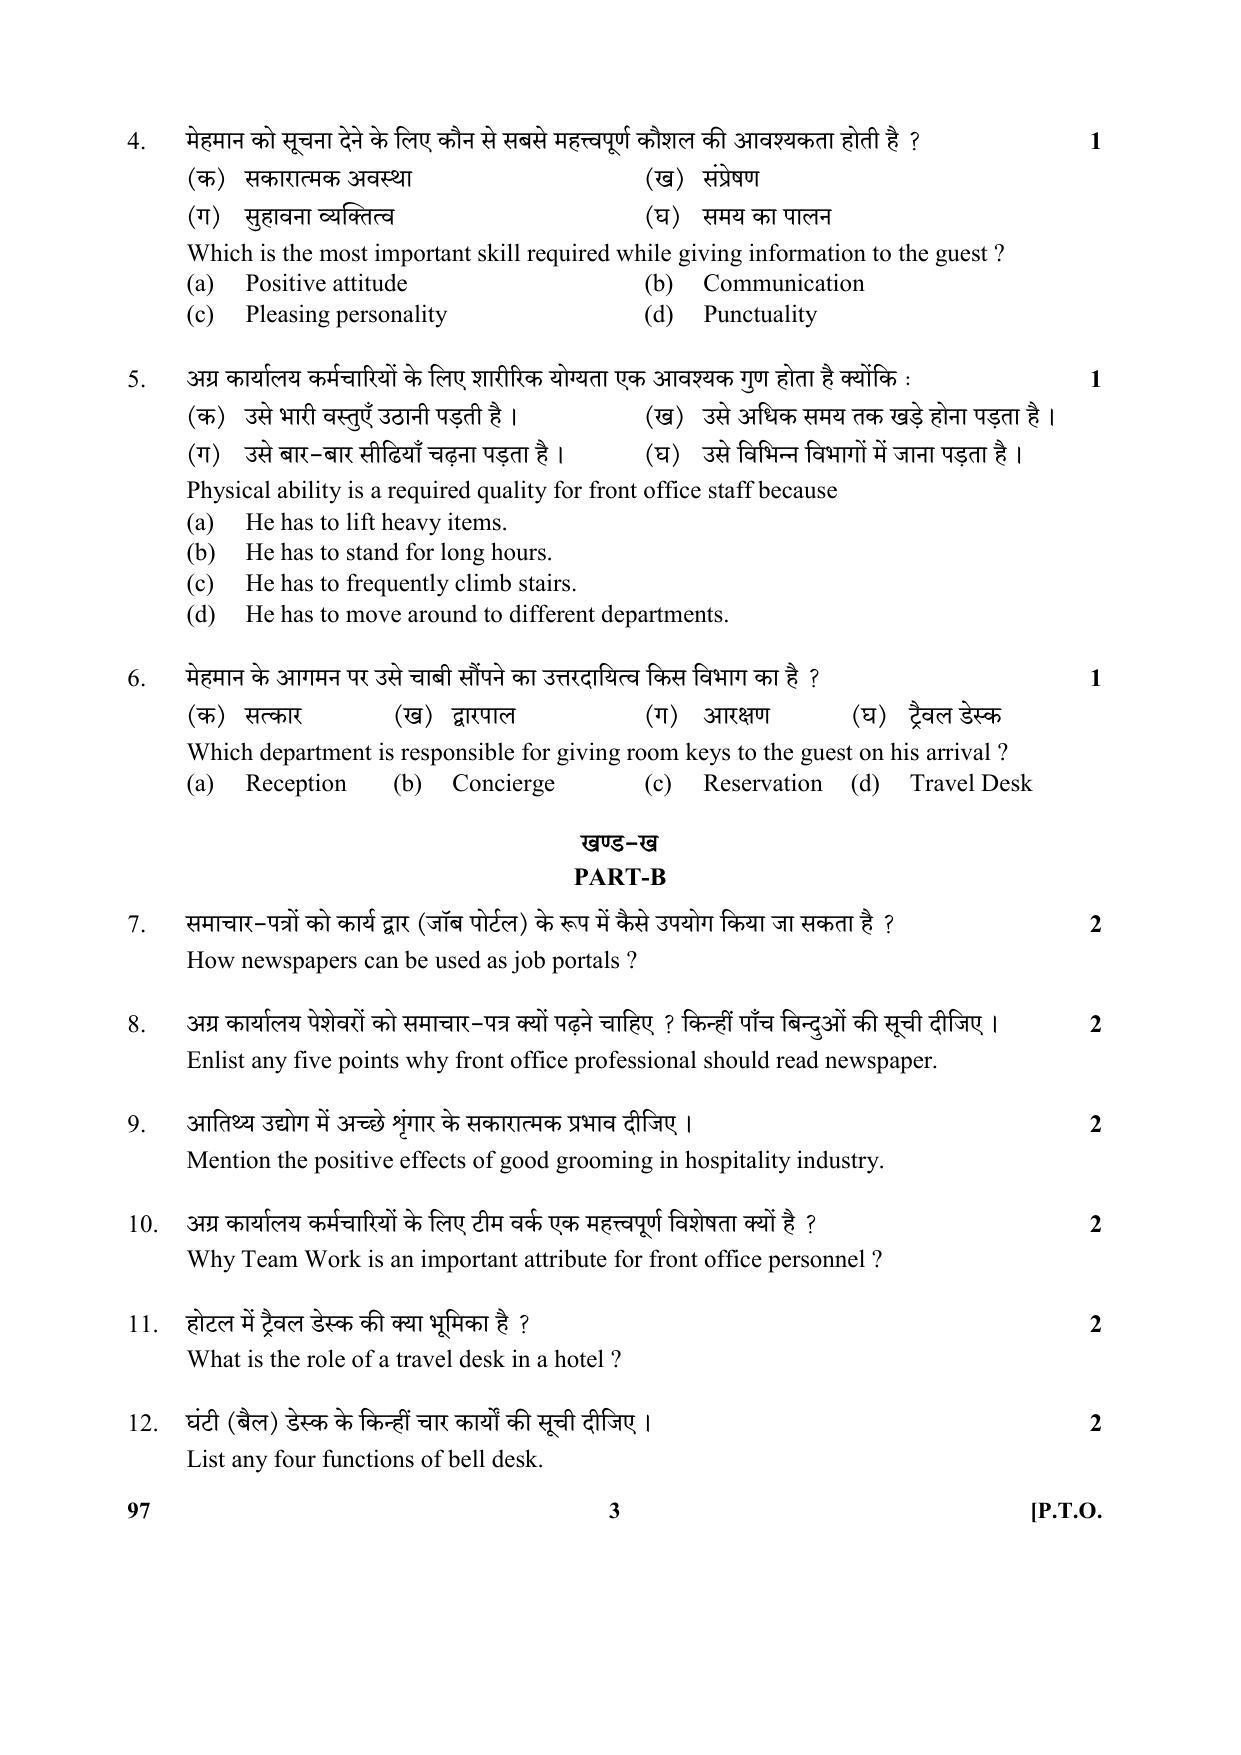 CBSE Class 10 97 (Front Office Operations) 2018 Question Paper - Page 3